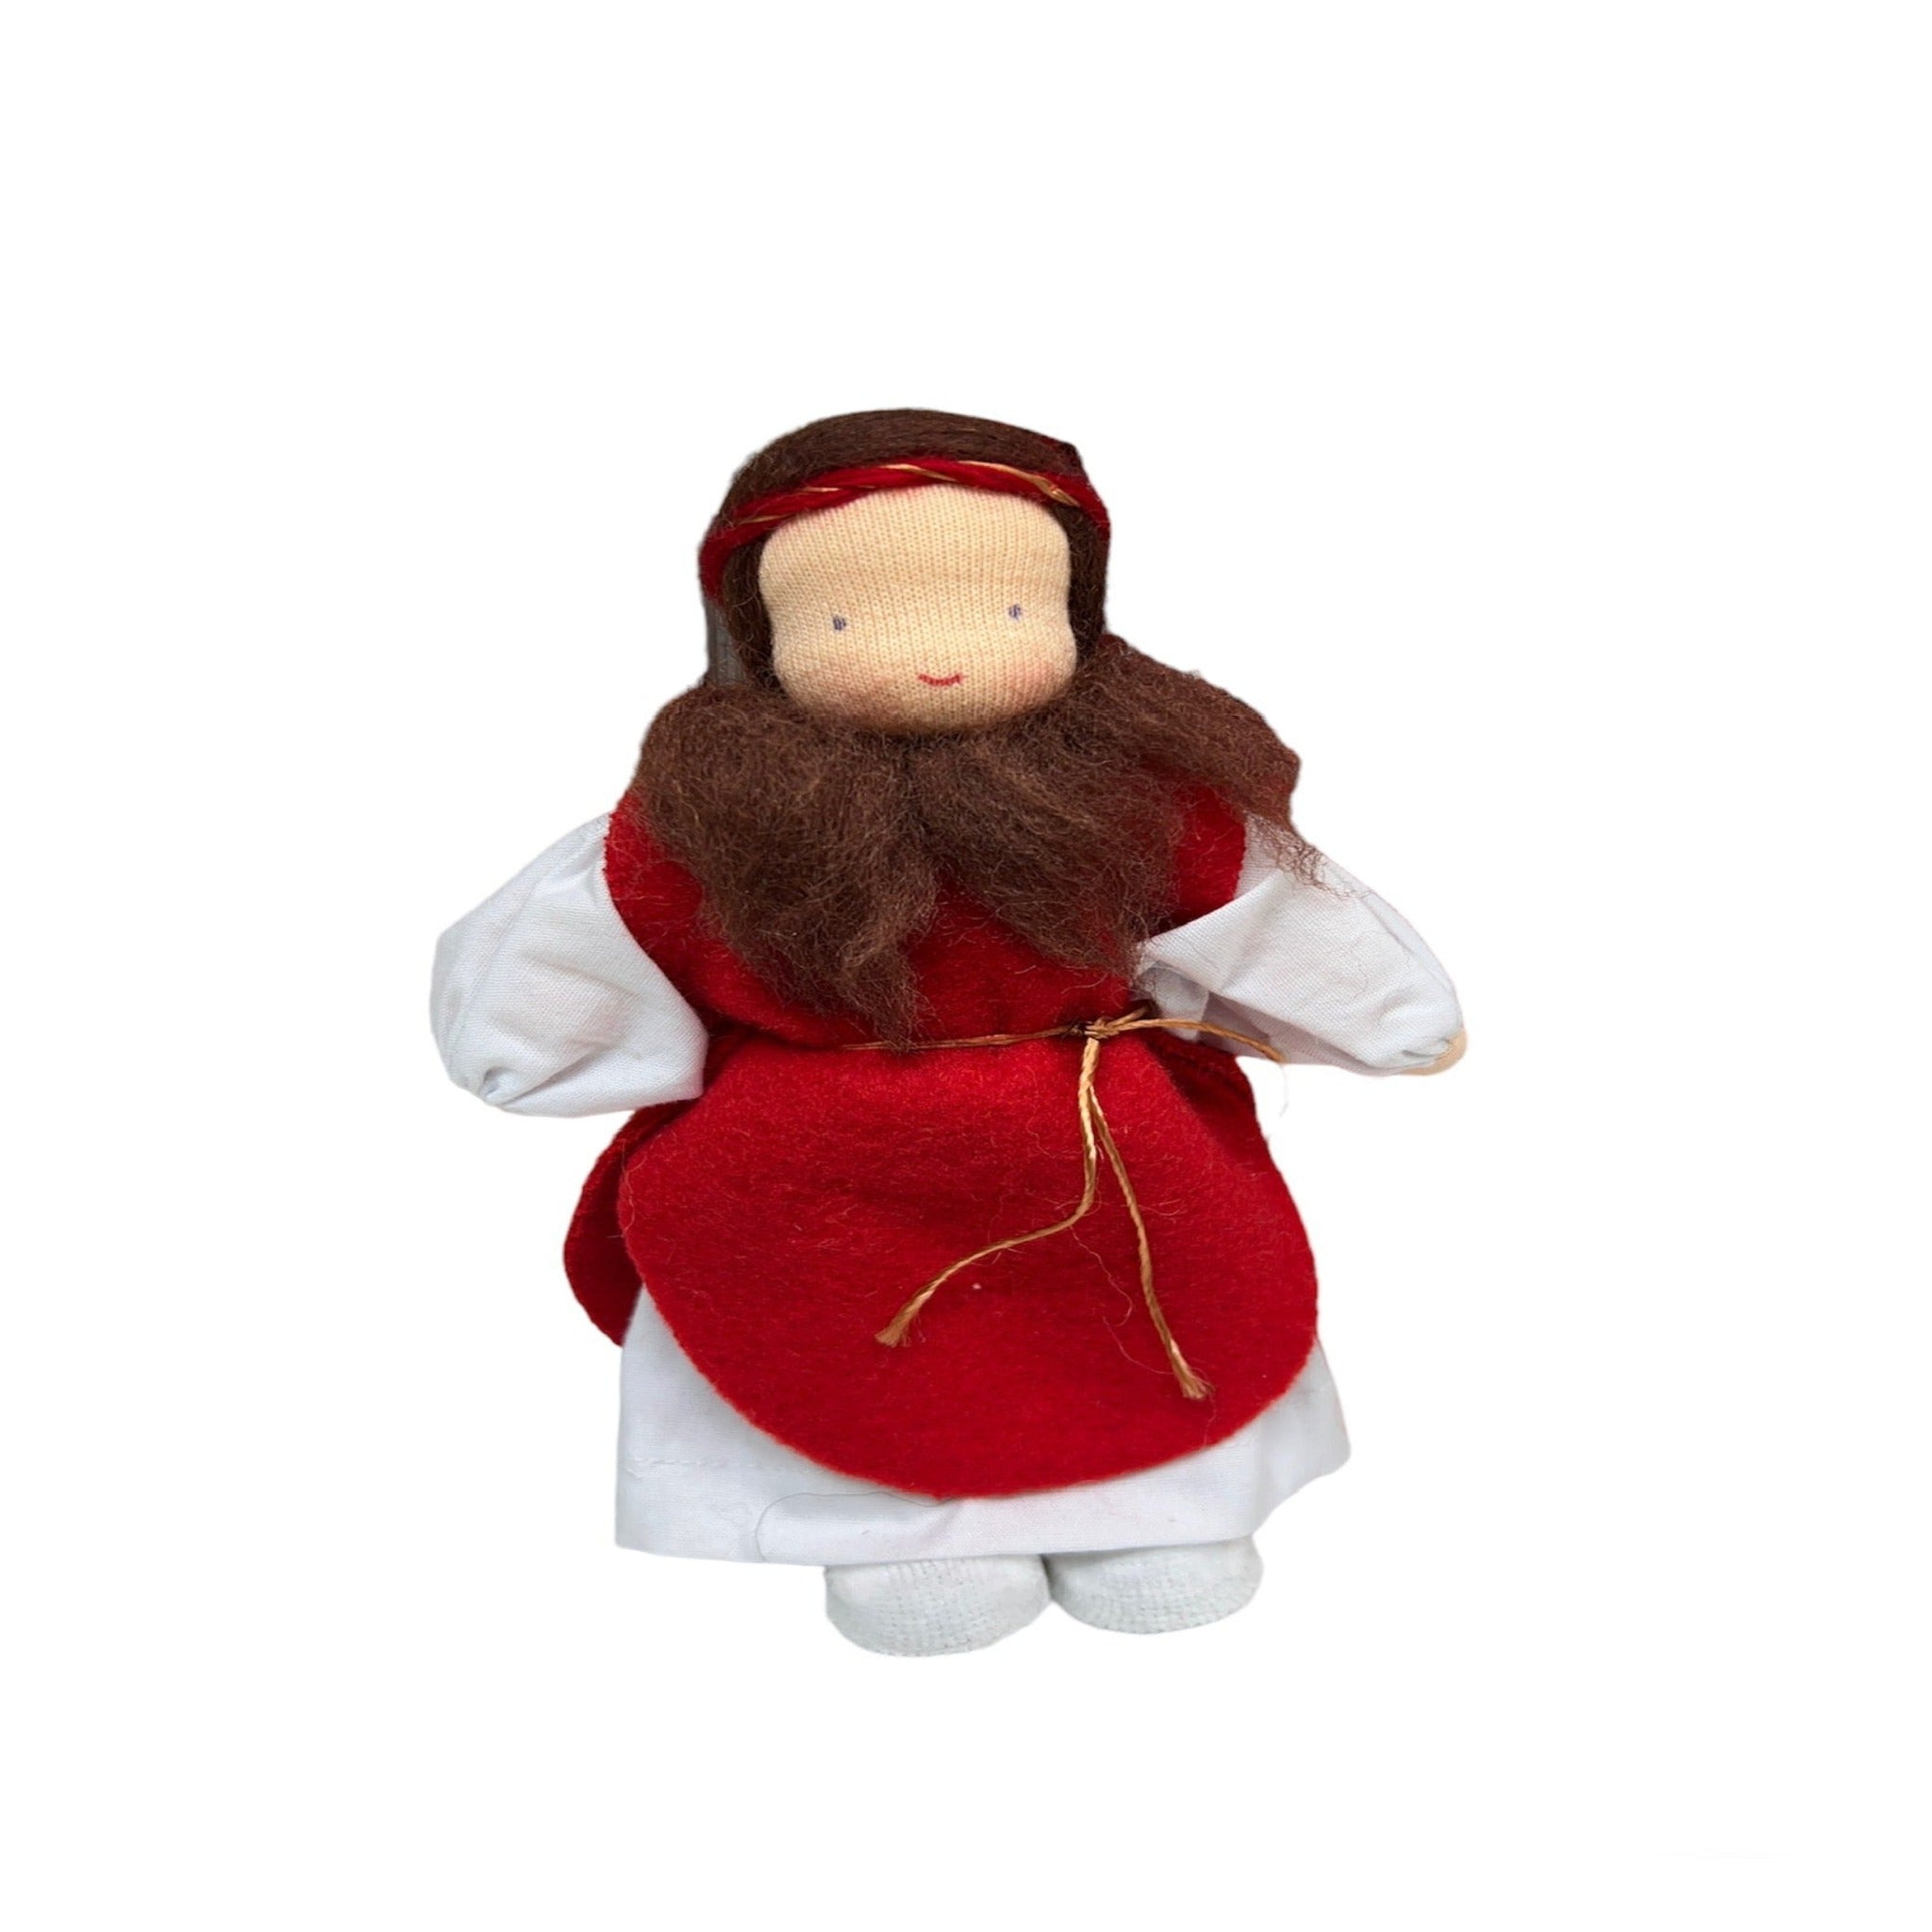 red king/wise men doll